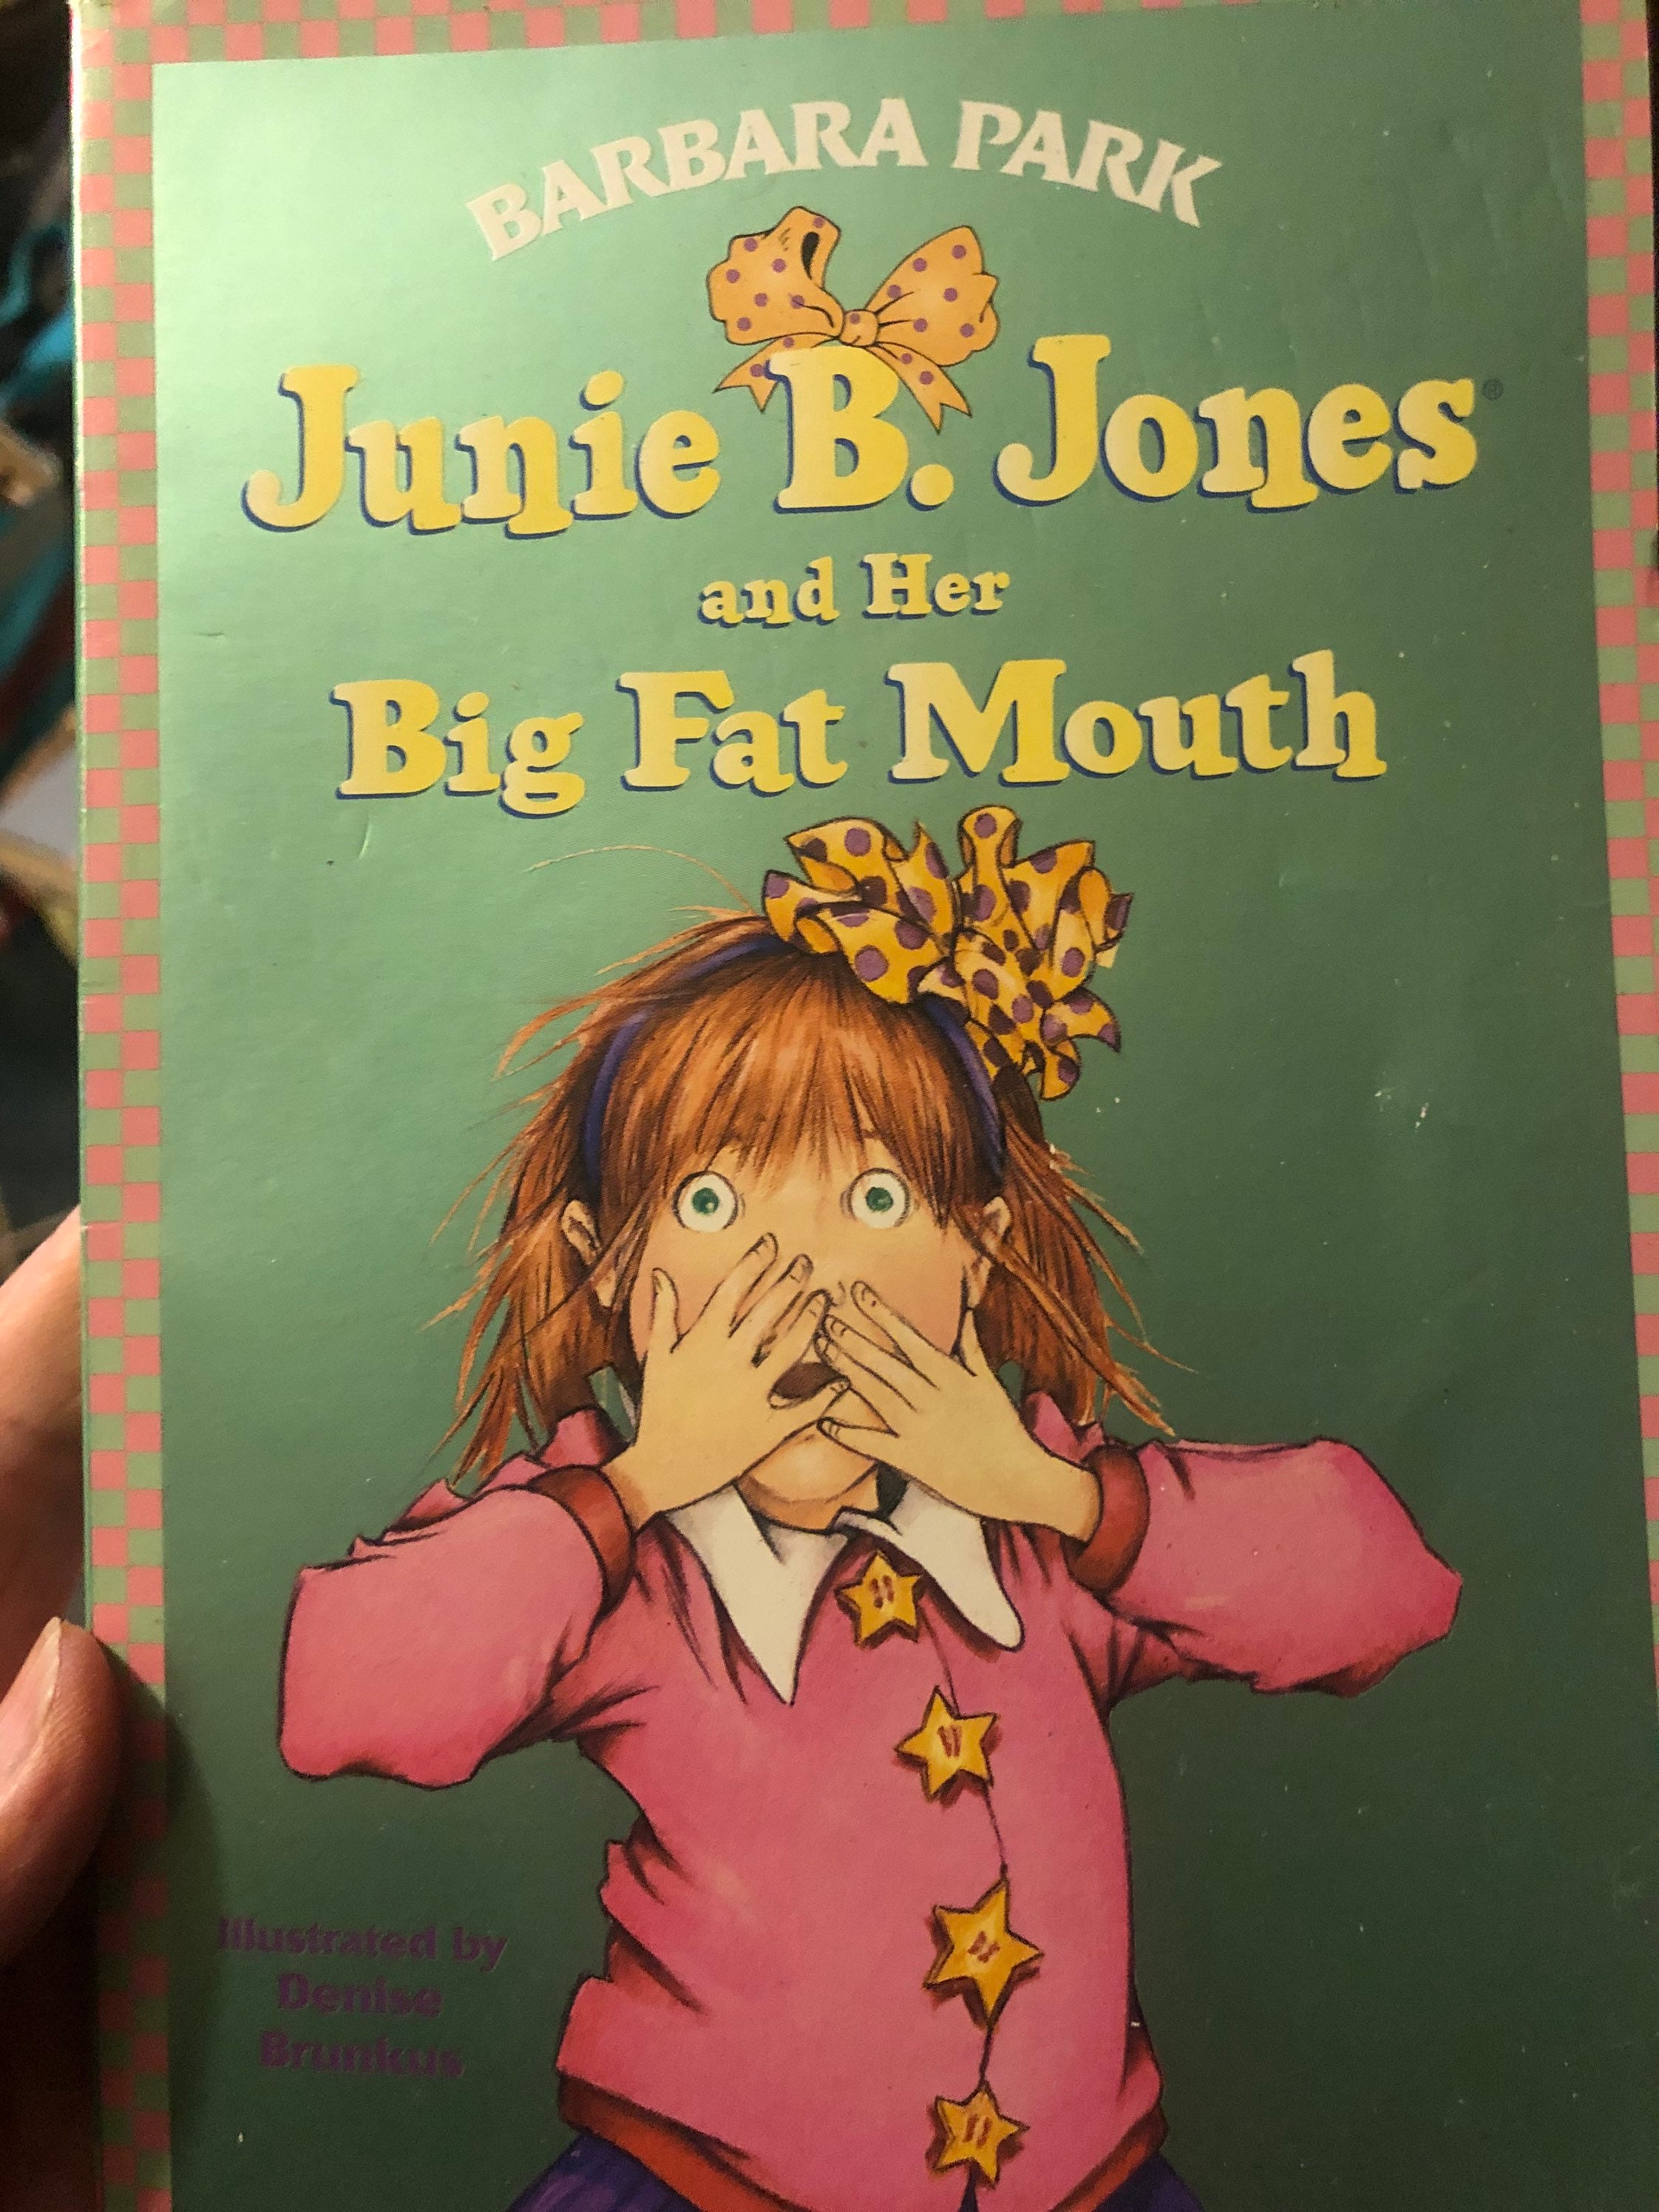 Junie B Jones And Her Big Fat Mouth By Barbara Park Vintage Etsy